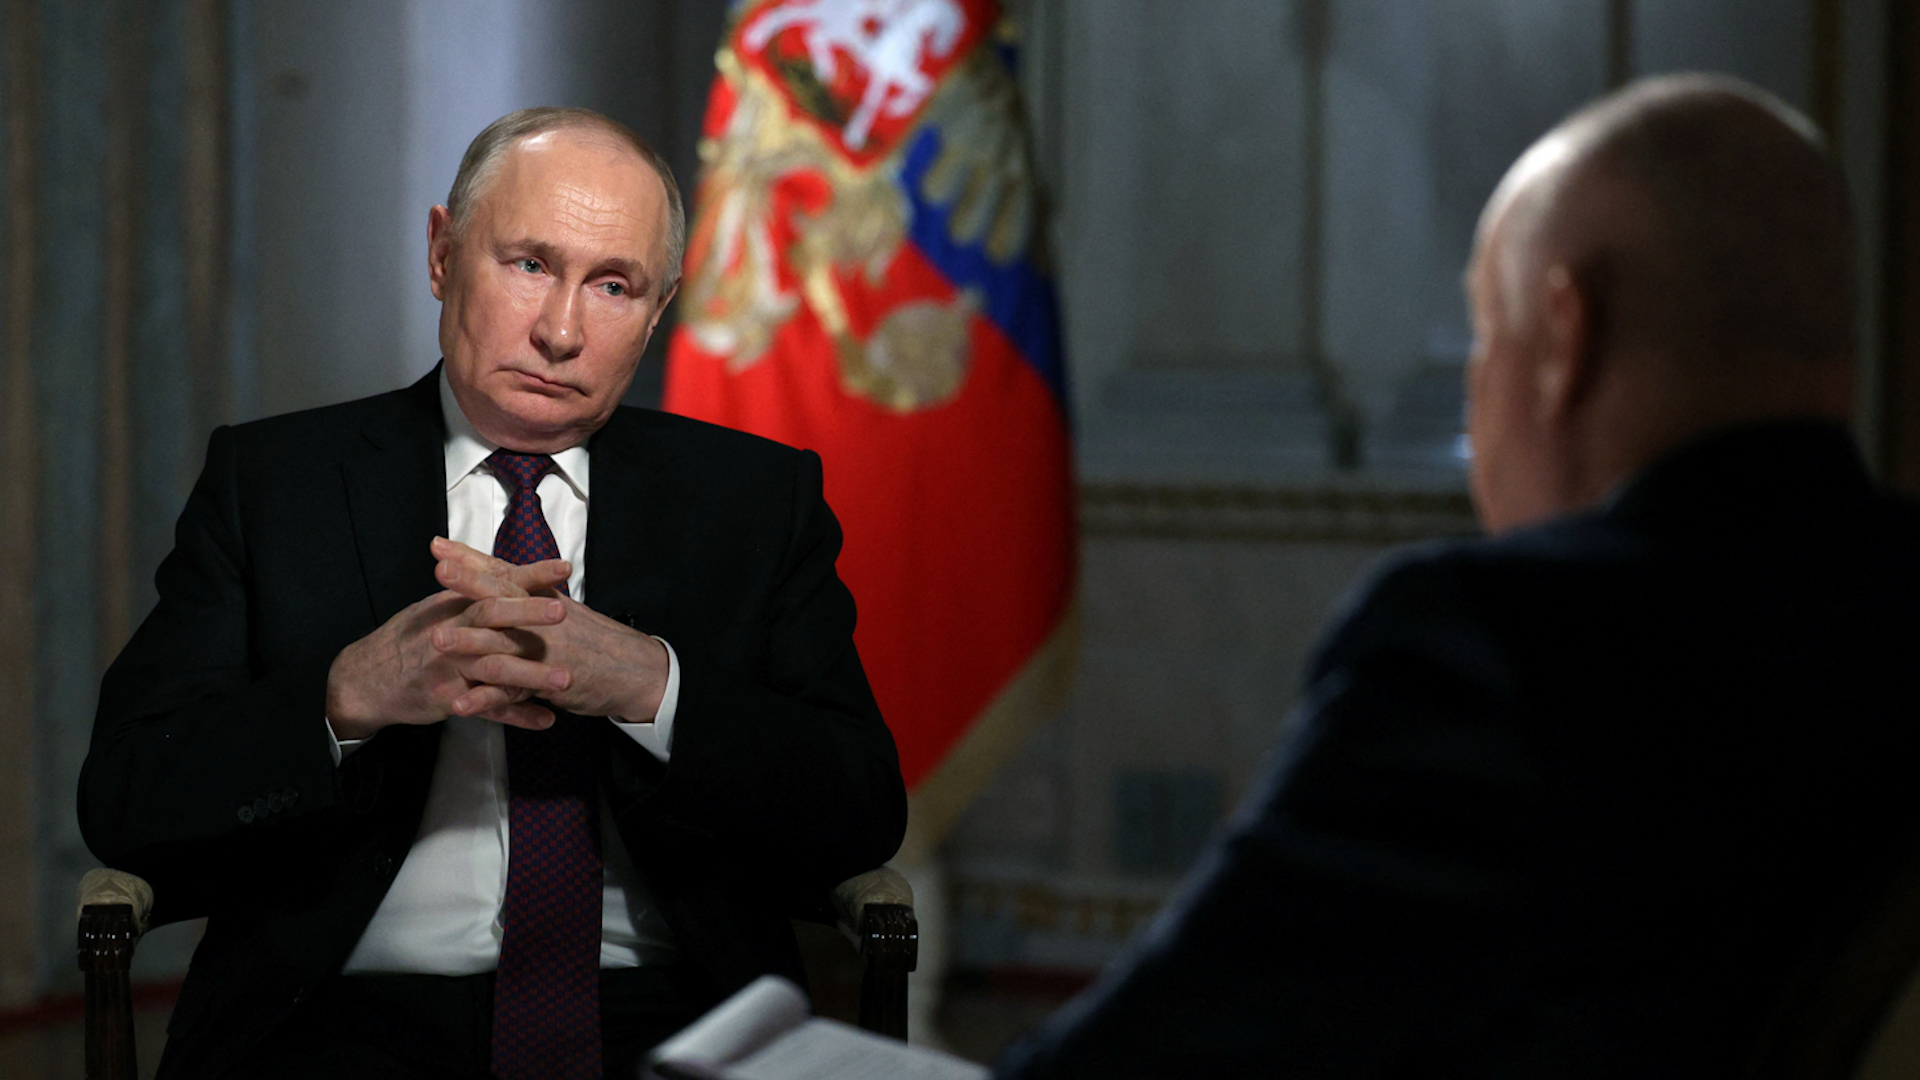 Just days before Russia’s presidential election, in which Vladimir Putin is widely expected to secure another six years in power, the Russian president has declared the country’s readiness to deploy nuclear weapons if its statehood, sovereignty, or independence are threatened. In an interview aired today on Russia’s state television, Putin issued a warning to the United States, stating that sending troops to Ukraine would be perceived as a significant escalation.